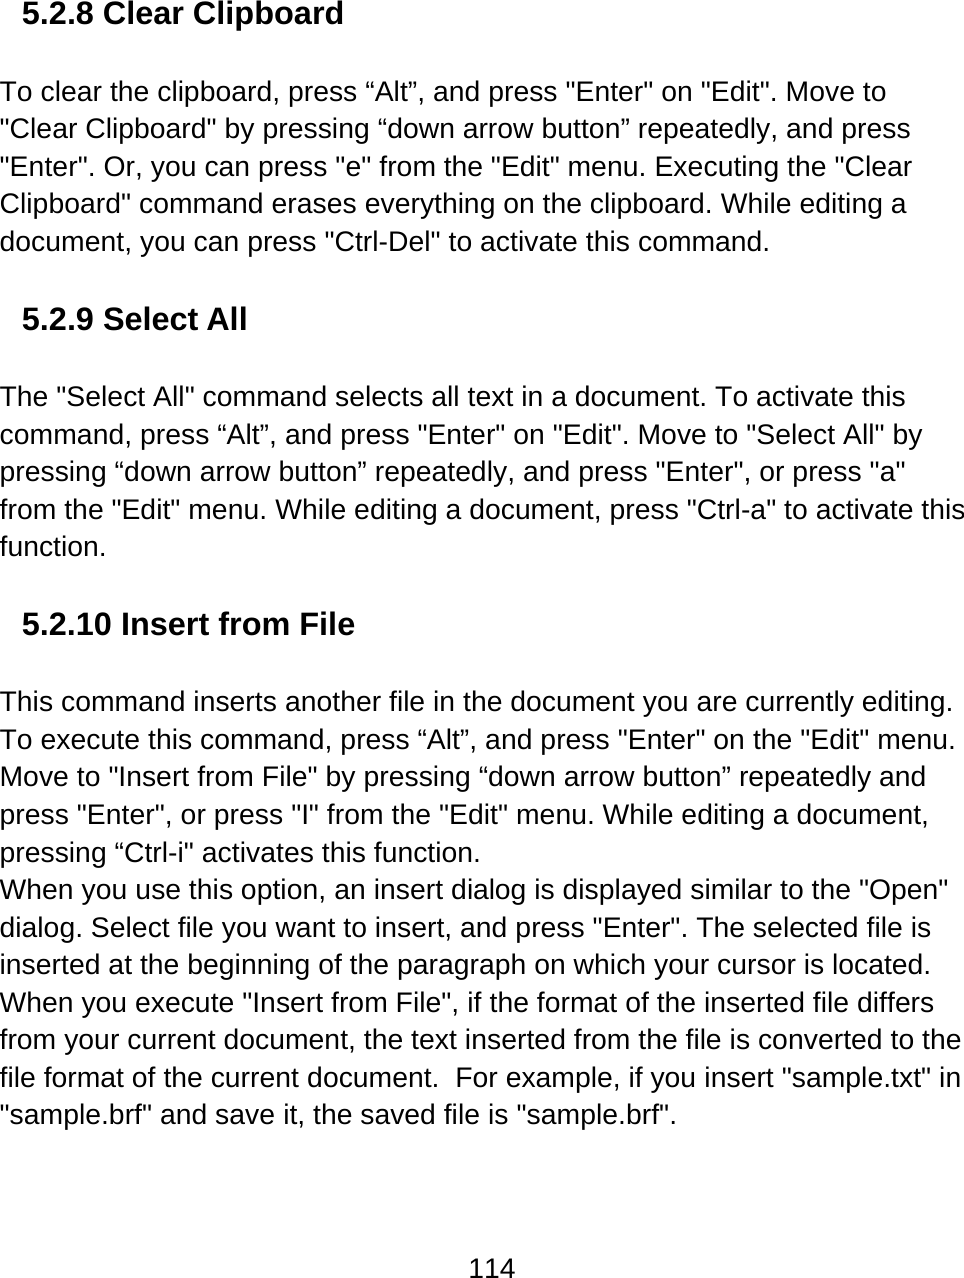 114   5.2.8 Clear Clipboard  To clear the clipboard, press “Alt”, and press &quot;Enter&quot; on &quot;Edit&quot;. Move to &quot;Clear Clipboard&quot; by pressing “down arrow button” repeatedly, and press &quot;Enter&quot;. Or, you can press &quot;e&quot; from the &quot;Edit&quot; menu. Executing the &quot;Clear Clipboard&quot; command erases everything on the clipboard. While editing a document, you can press &quot;Ctrl-Del&quot; to activate this command.  5.2.9 Select All  The &quot;Select All&quot; command selects all text in a document. To activate this command, press “Alt”, and press &quot;Enter&quot; on &quot;Edit&quot;. Move to &quot;Select All&quot; by pressing “down arrow button” repeatedly, and press &quot;Enter&quot;, or press &quot;a&quot; from the &quot;Edit&quot; menu. While editing a document, press &quot;Ctrl-a&quot; to activate this function.  5.2.10 Insert from File  This command inserts another file in the document you are currently editing. To execute this command, press “Alt”, and press &quot;Enter&quot; on the &quot;Edit&quot; menu. Move to &quot;Insert from File&quot; by pressing “down arrow button” repeatedly and press &quot;Enter&quot;, or press &quot;I&quot; from the &quot;Edit&quot; menu. While editing a document, pressing “Ctrl-i&quot; activates this function. When you use this option, an insert dialog is displayed similar to the &quot;Open&quot; dialog. Select file you want to insert, and press &quot;Enter&quot;. The selected file is inserted at the beginning of the paragraph on which your cursor is located. When you execute &quot;Insert from File&quot;, if the format of the inserted file differs from your current document, the text inserted from the file is converted to the file format of the current document.  For example, if you insert &quot;sample.txt&quot; in &quot;sample.brf&quot; and save it, the saved file is &quot;sample.brf&quot;. 